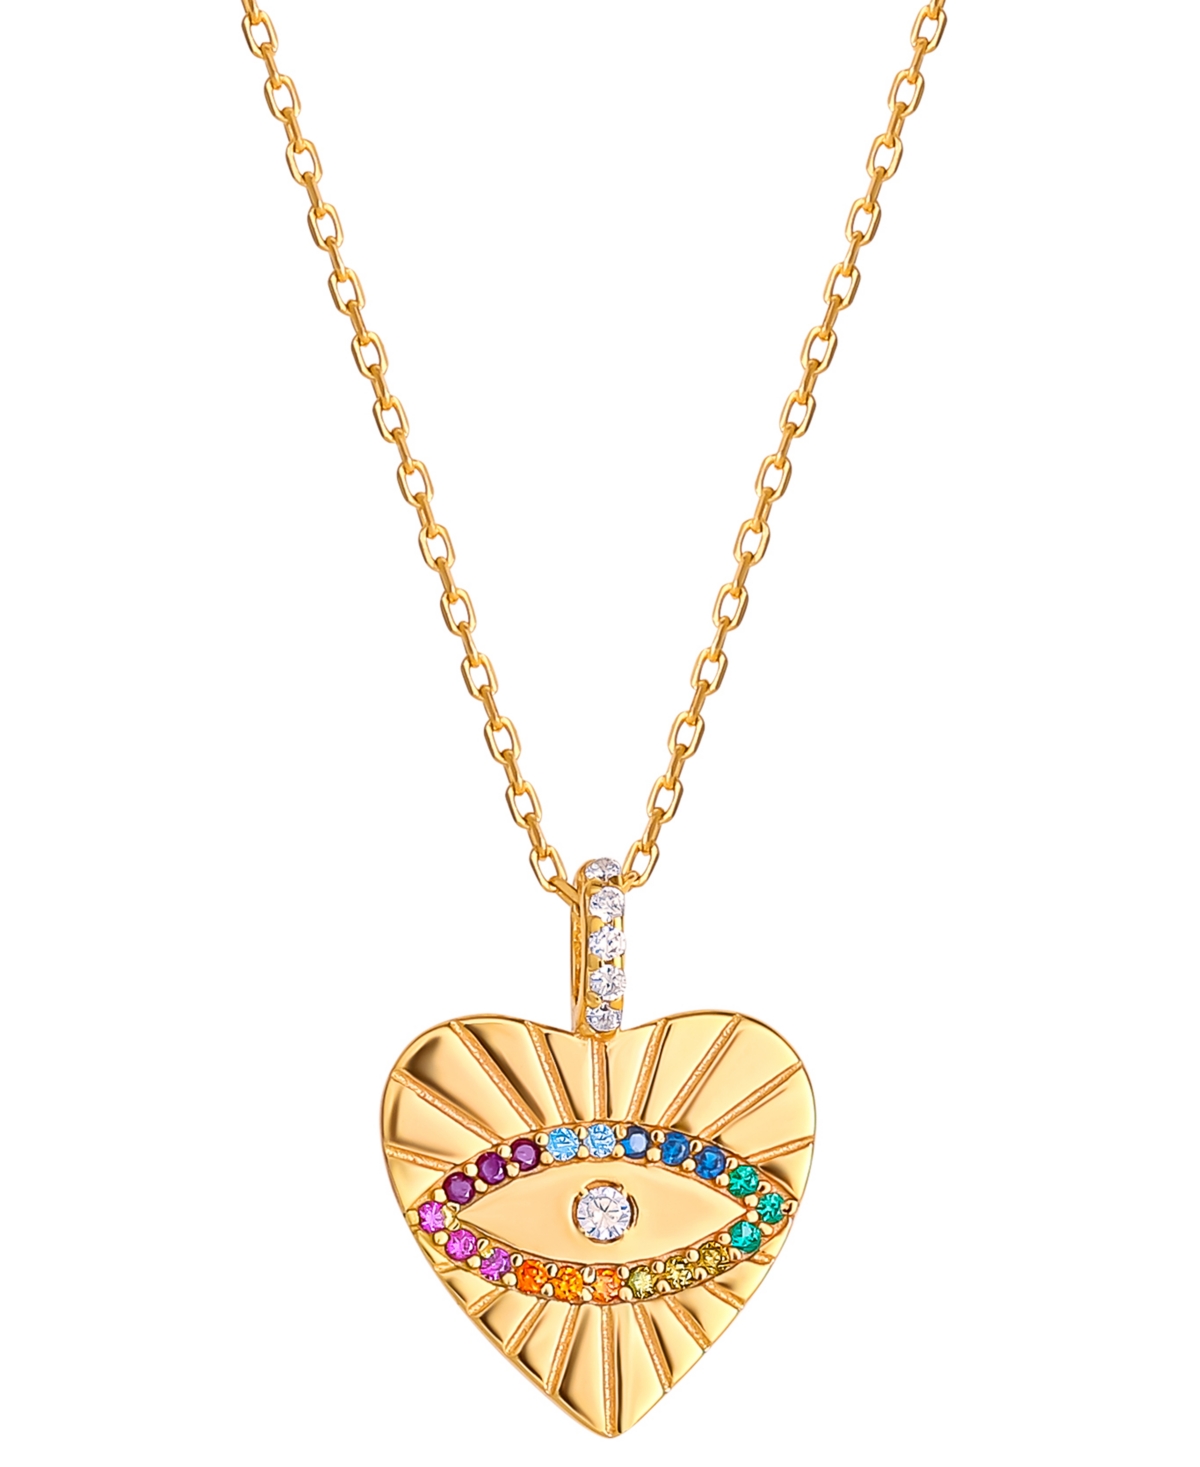 Giani Bernini Multicolor Cubic Zirconia Evil Eye Heart Pendant Necklace In 18k Gold-plated Sterling Silver, 16" +